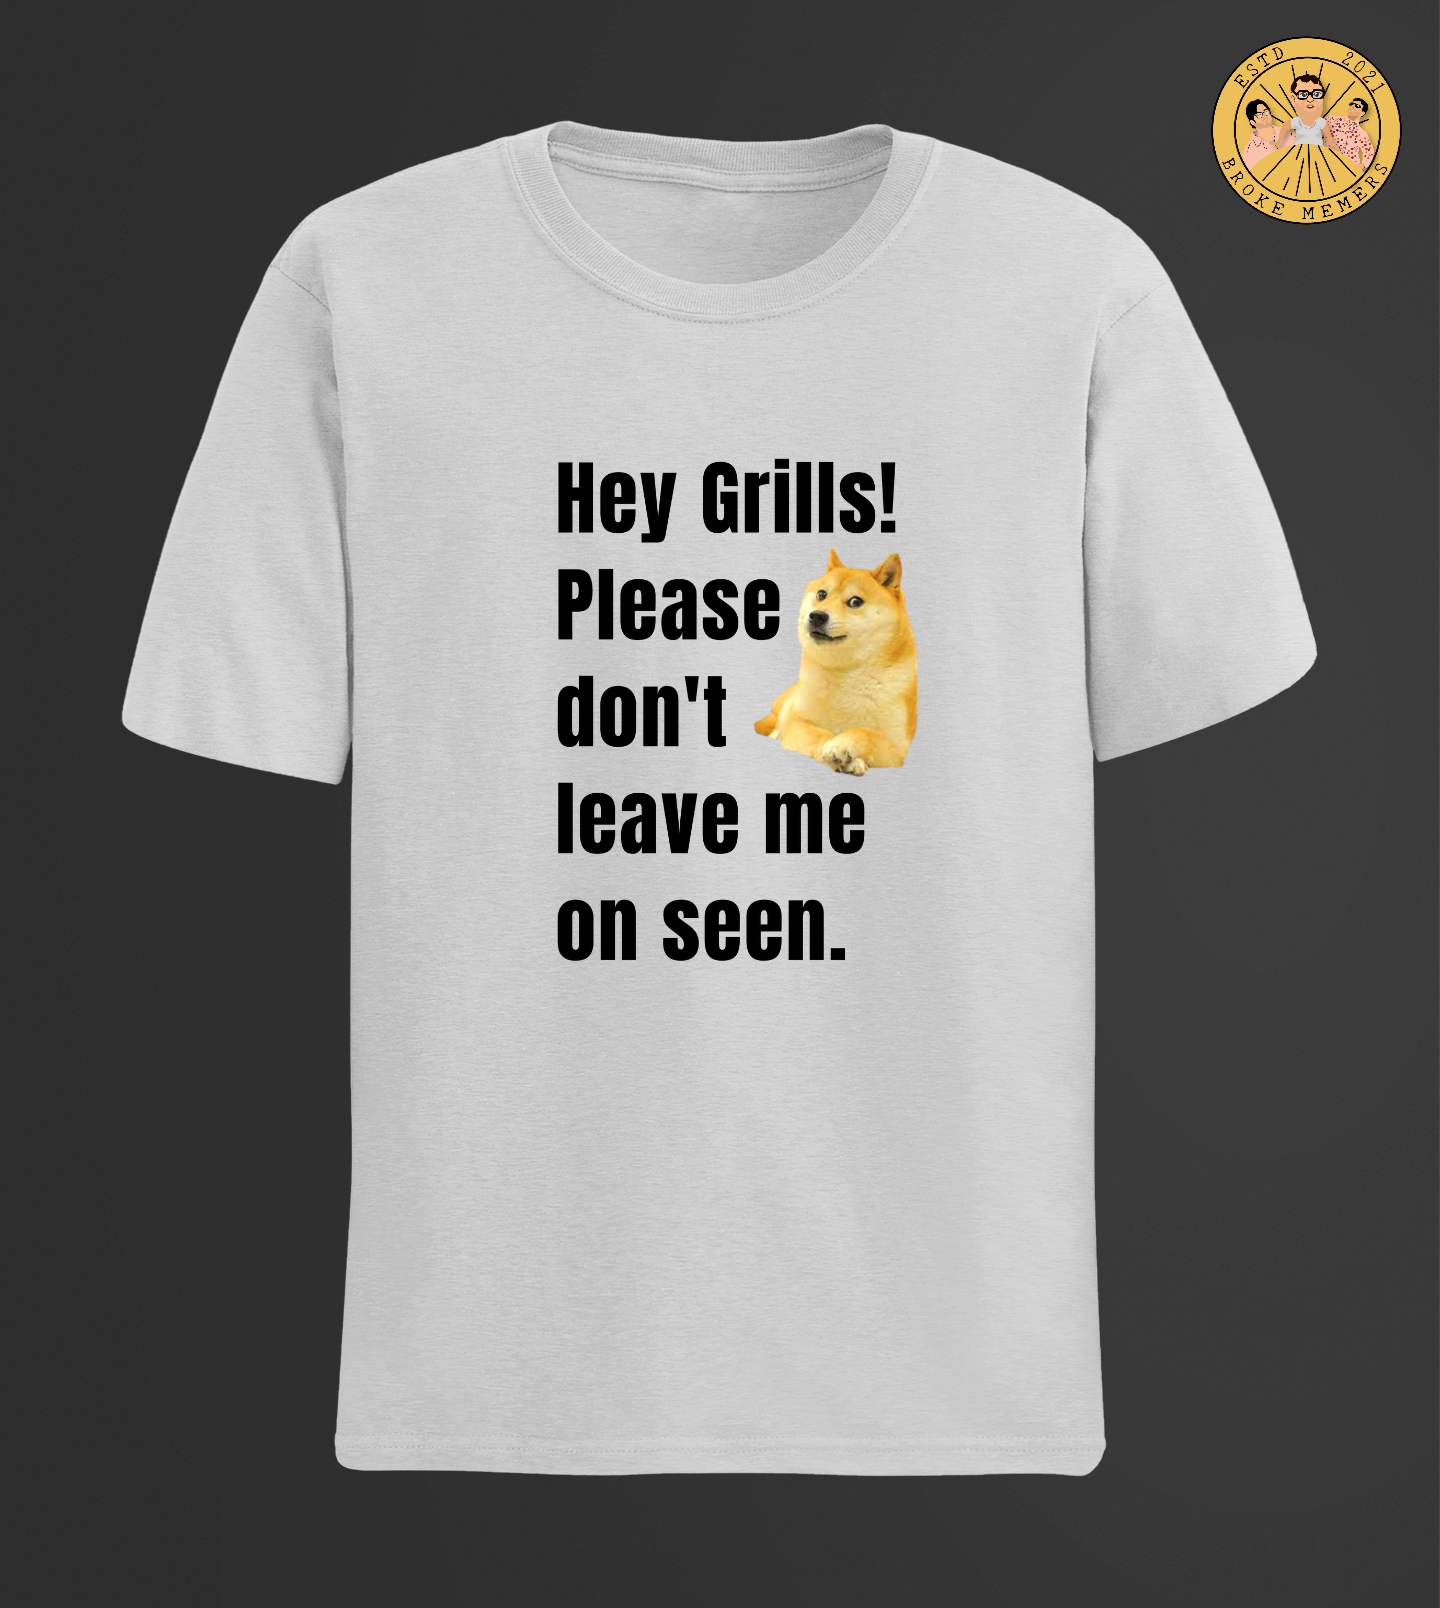 Hey grills please don't leave me | Half Sleeve Unisex T-Shirt